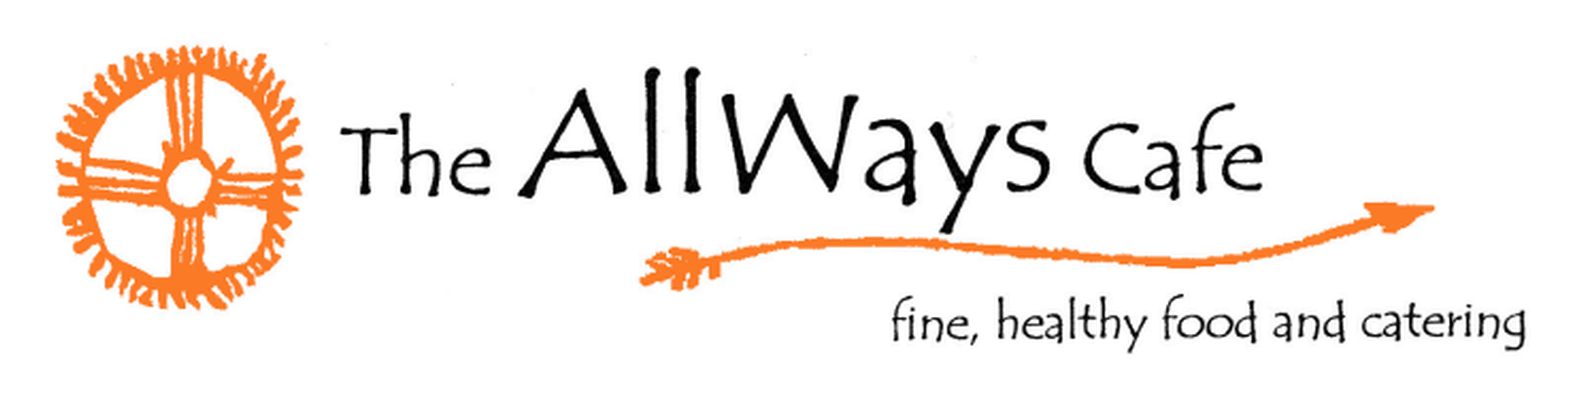 $50 Gift Certificate to AllWays Cafe